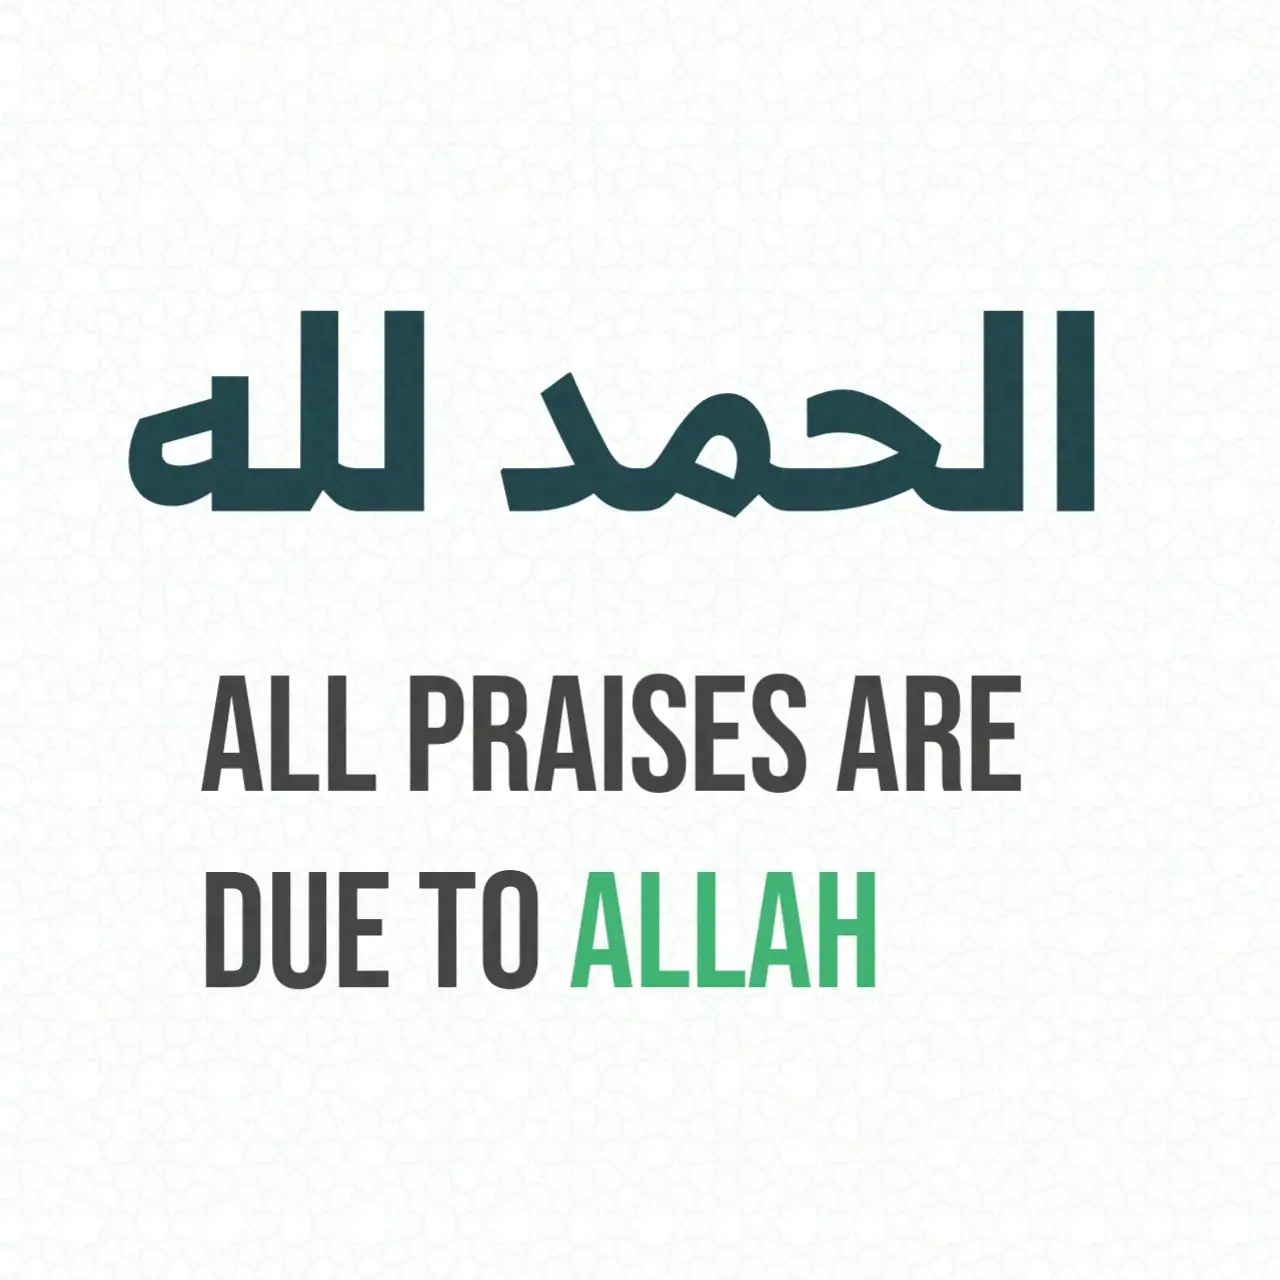 All praises are due to Allah